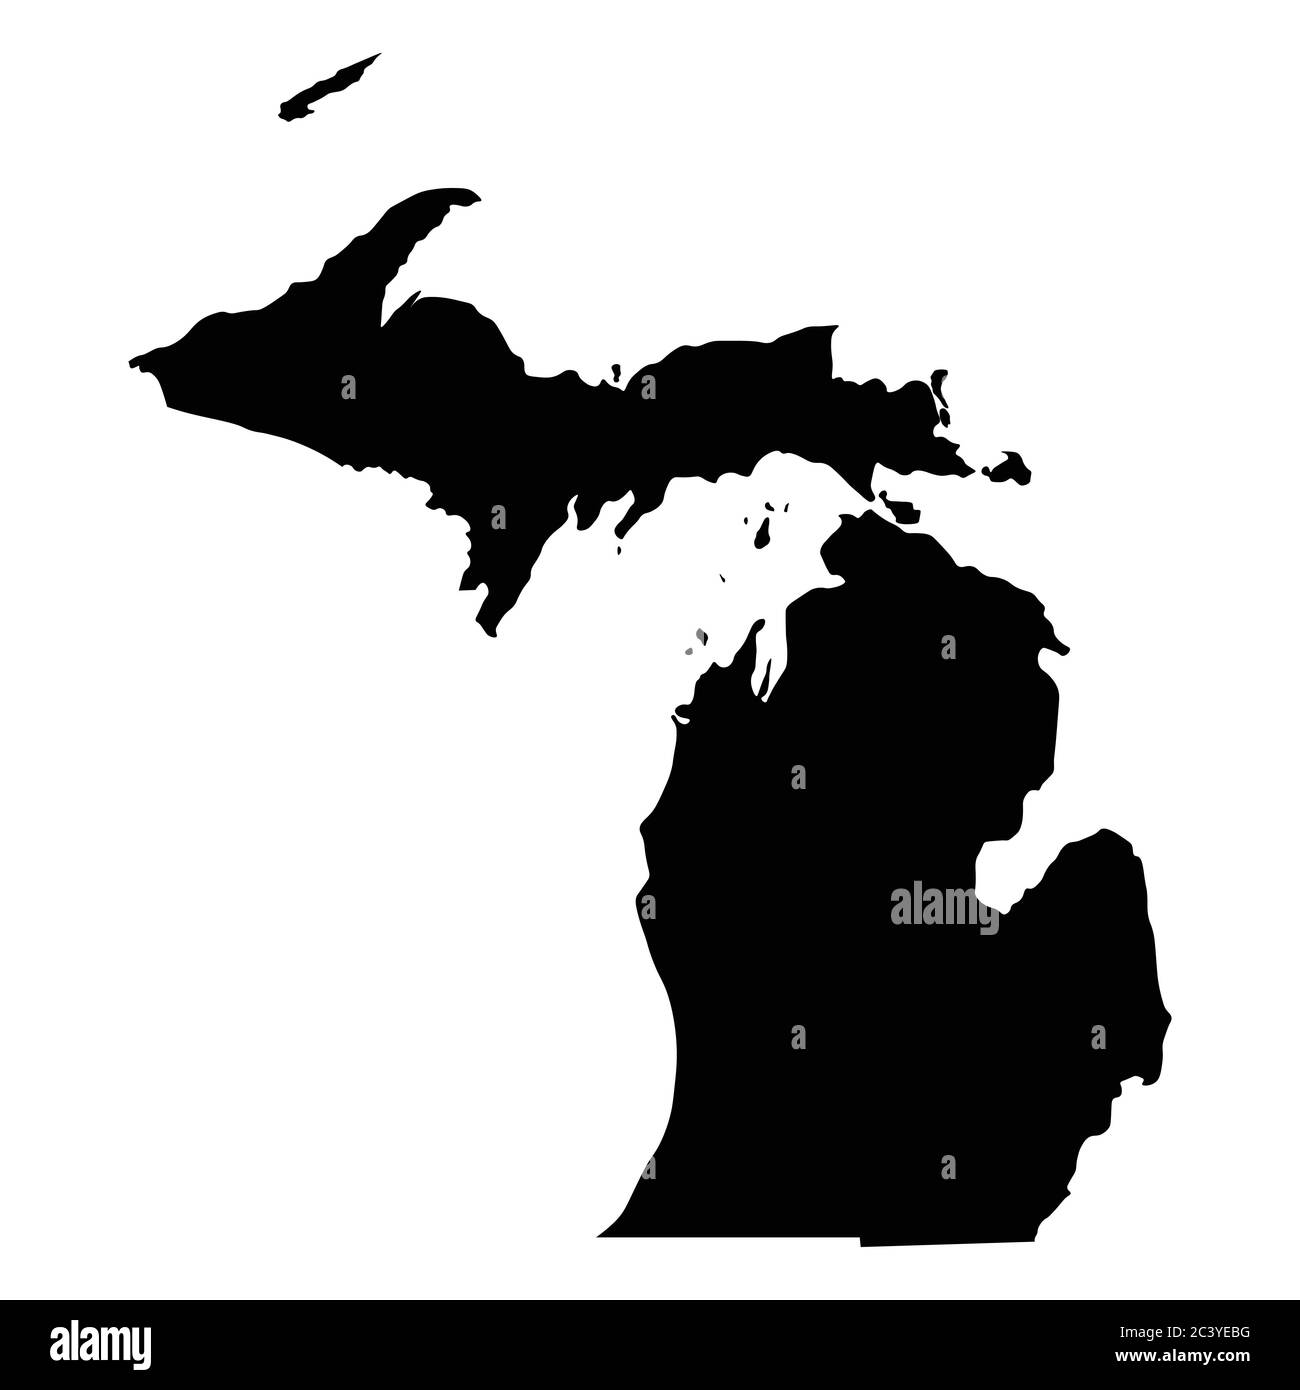 Michigan MI state Maps. Black silhouette solid map isolated on a white background. EPS Vector Stock Vector